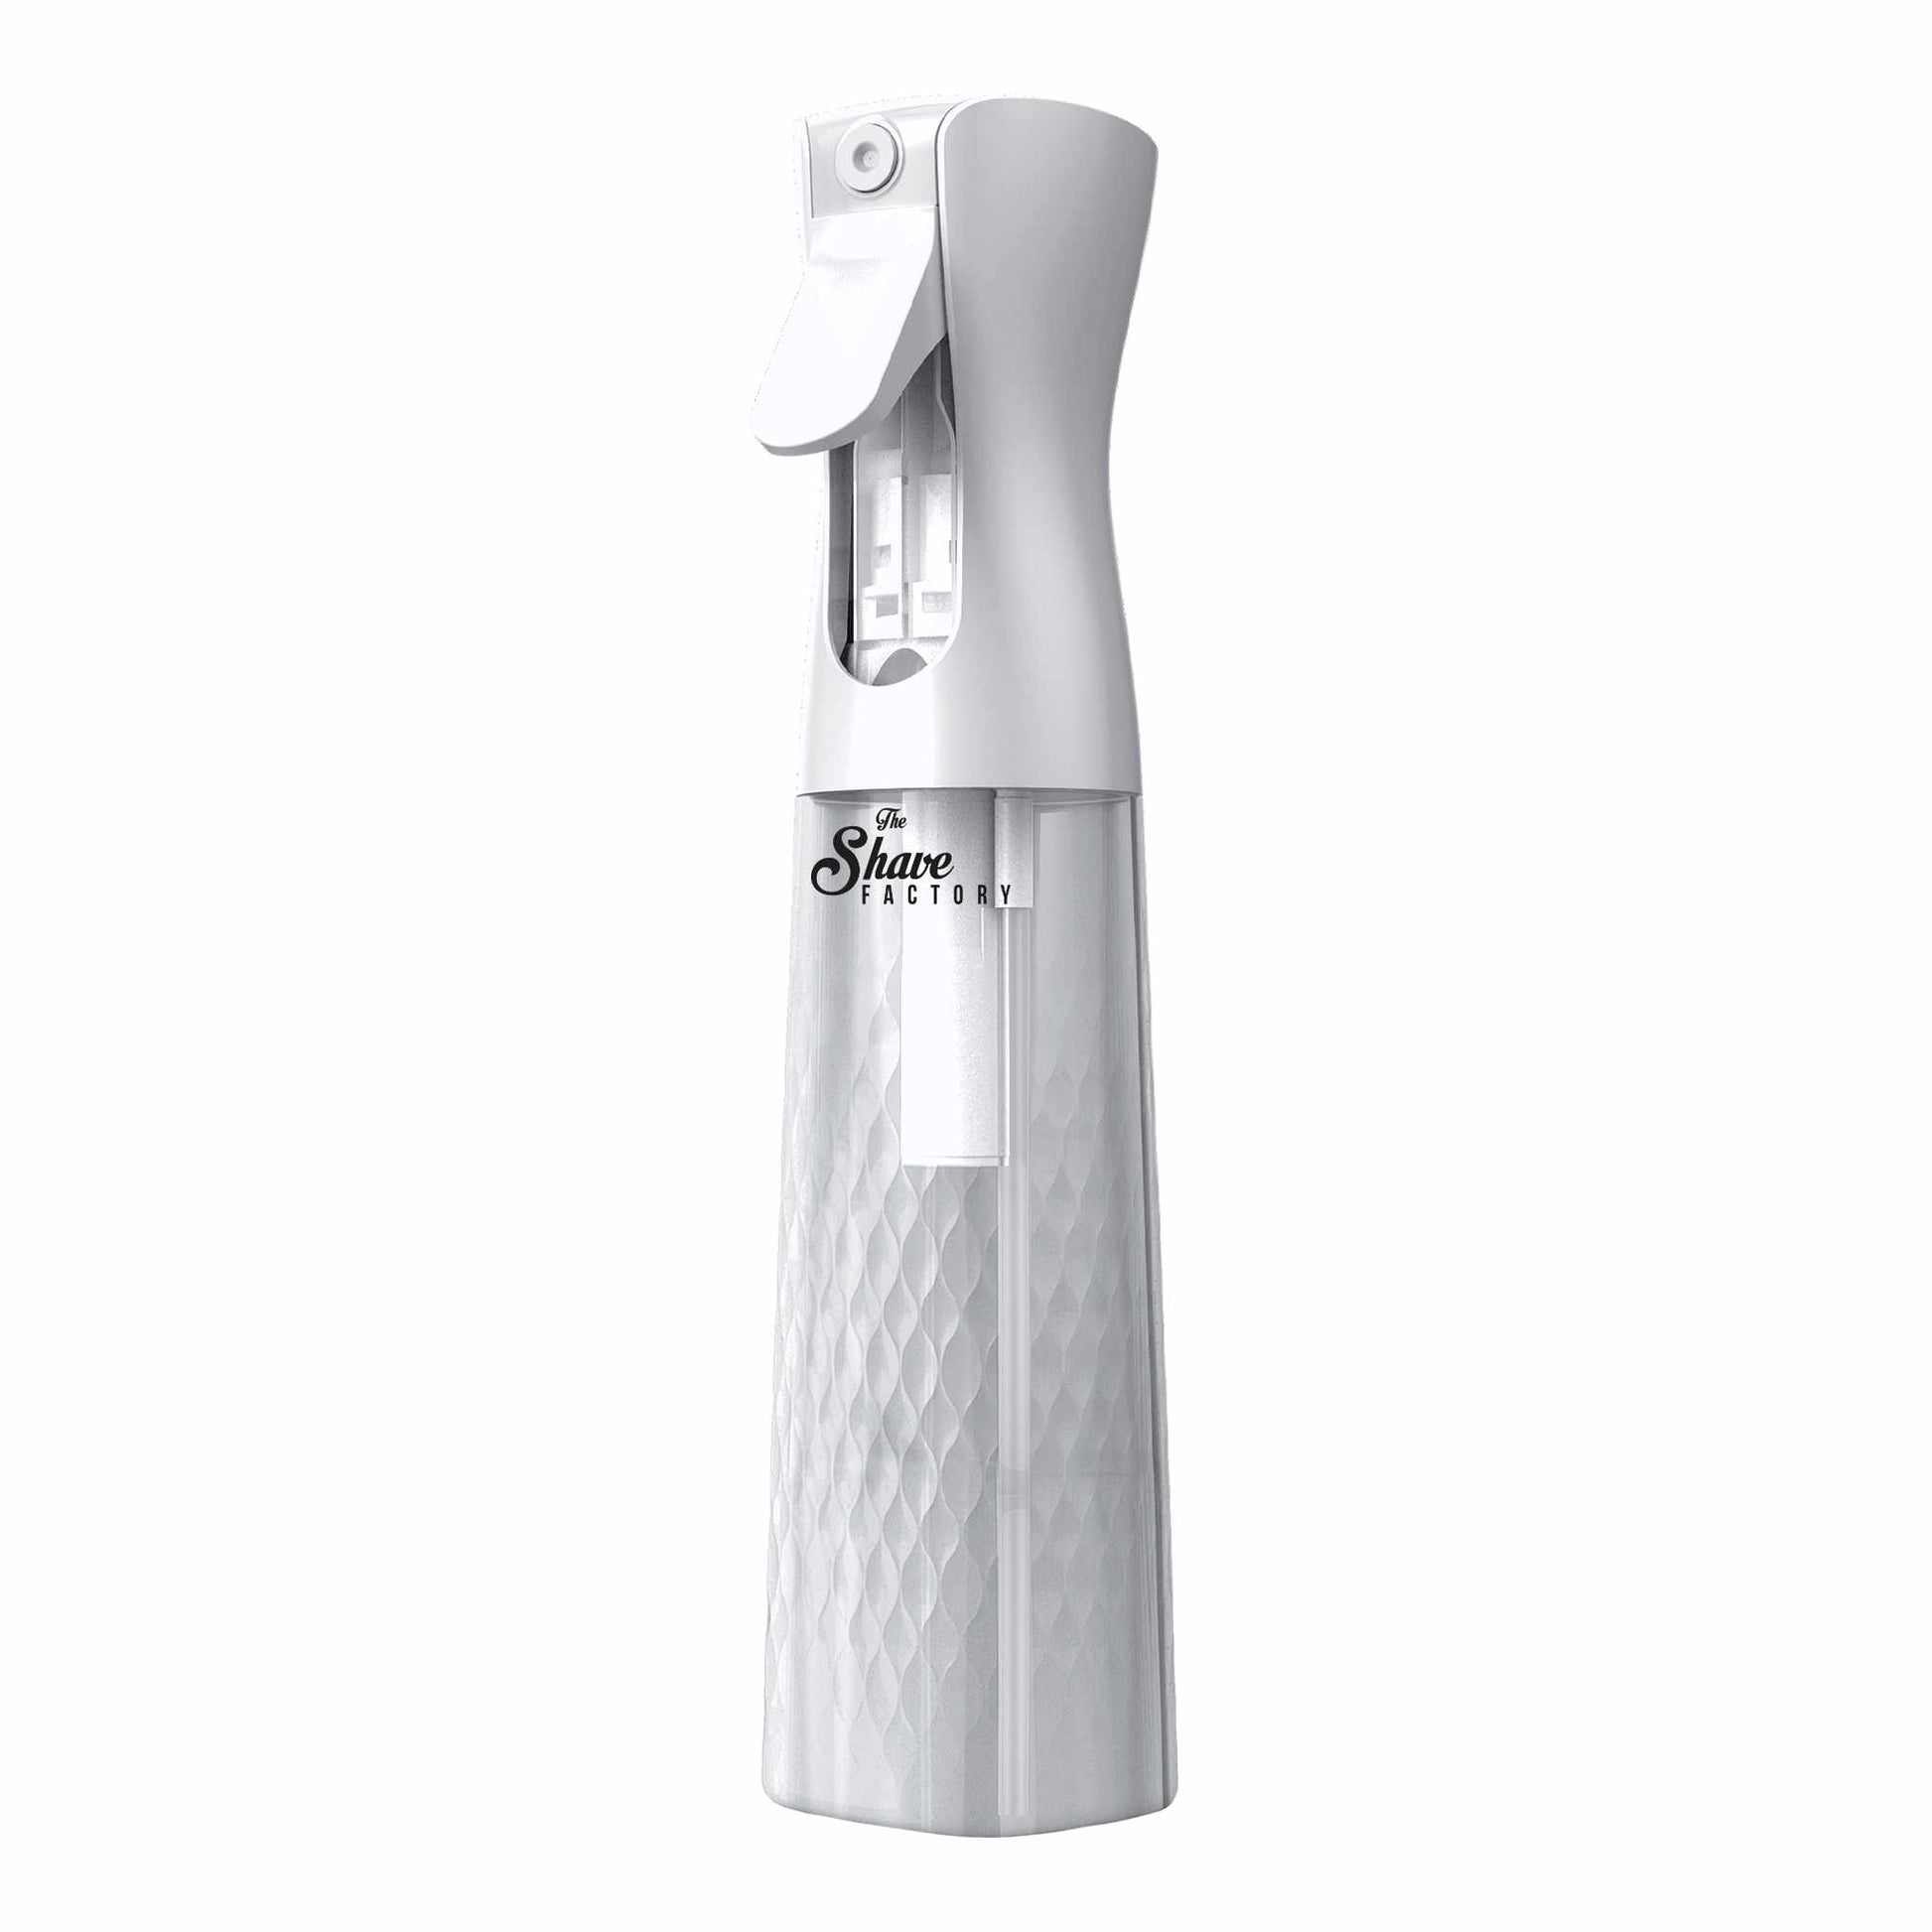 The Shave Factory Spray Bottle White 300 ml